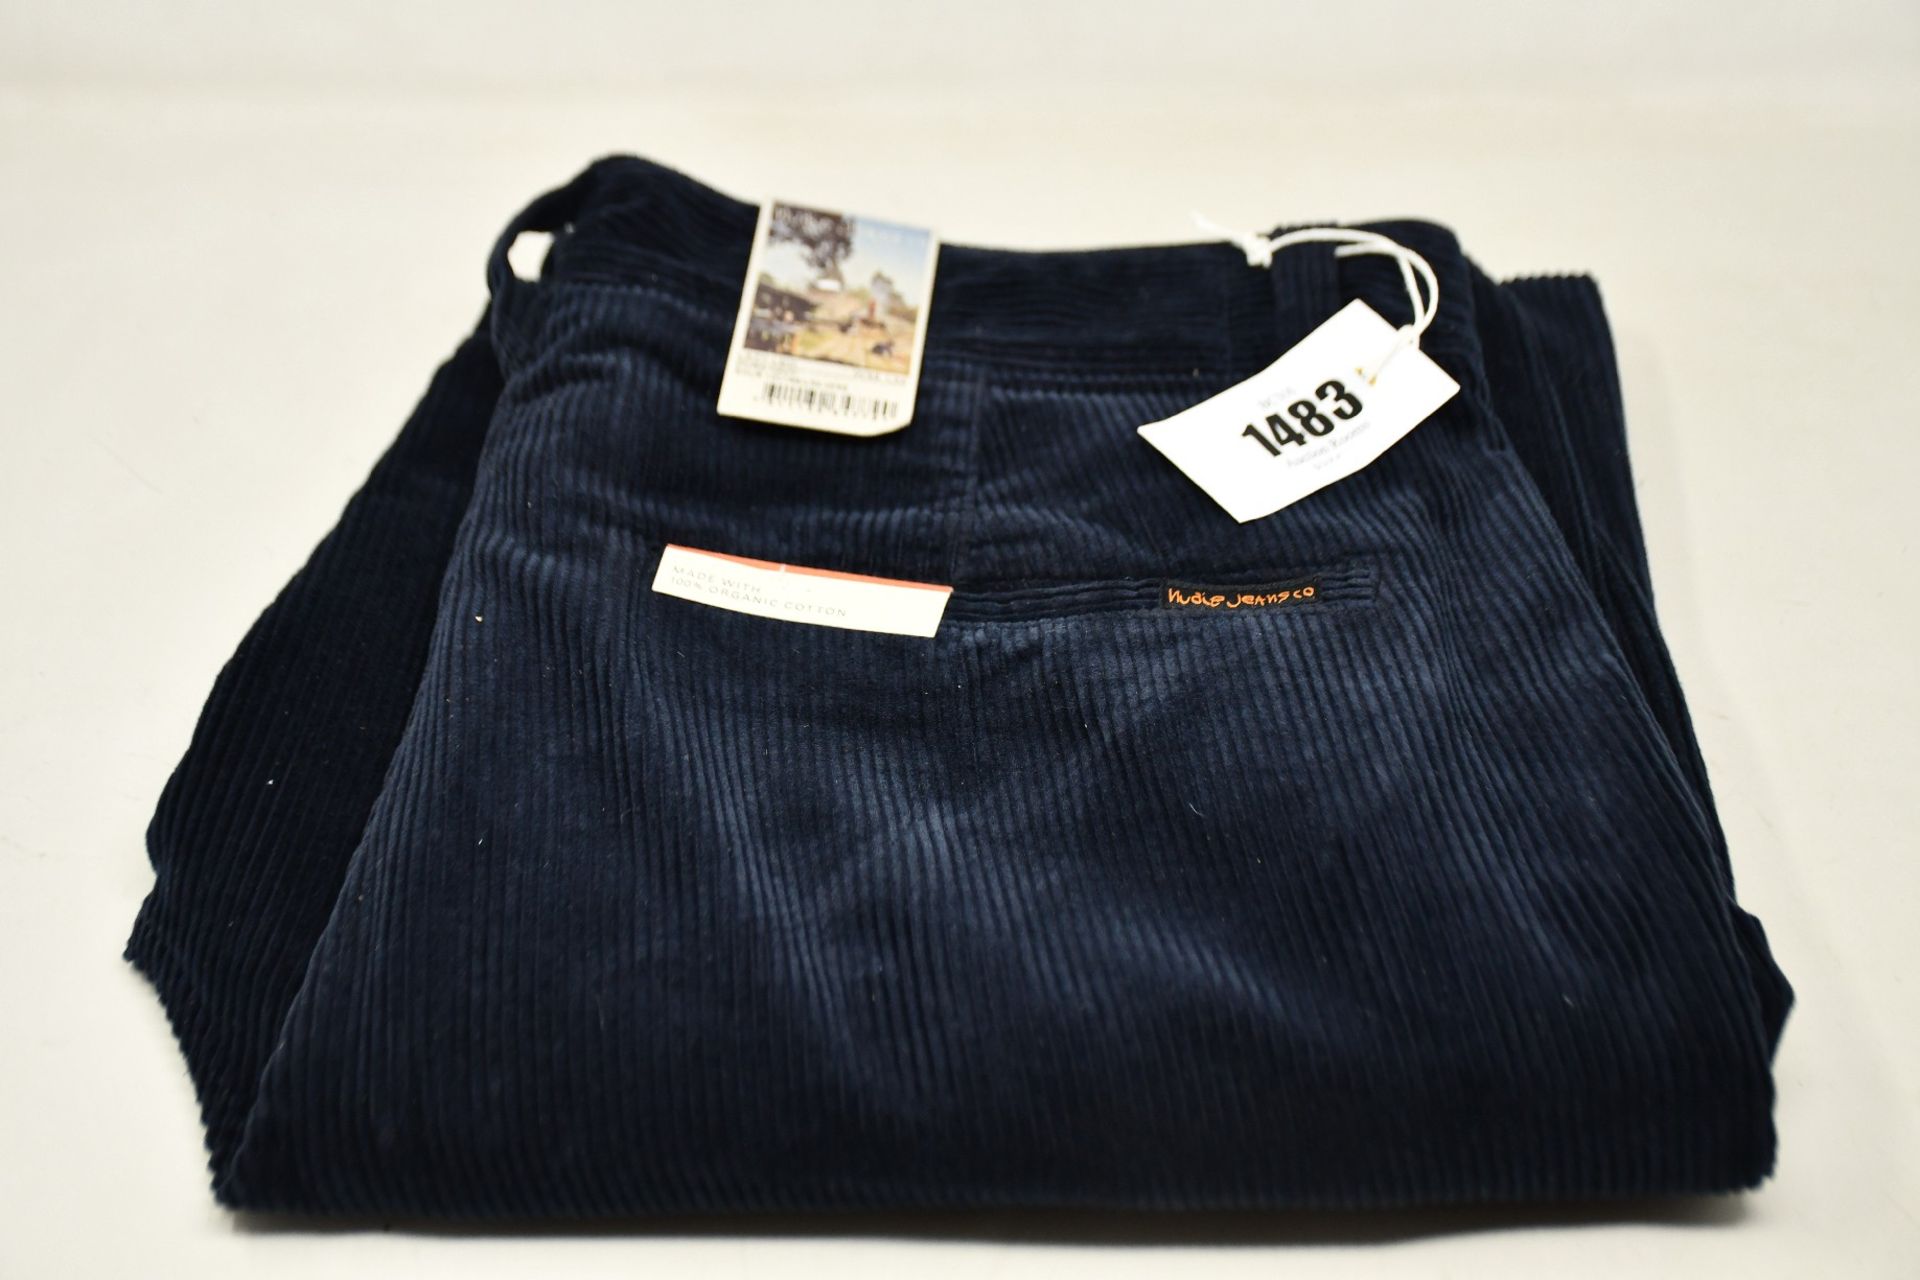 A pair of as new Nude Jeans Co. Lazy Leo navy cords (W33/L32 - RRP £135).